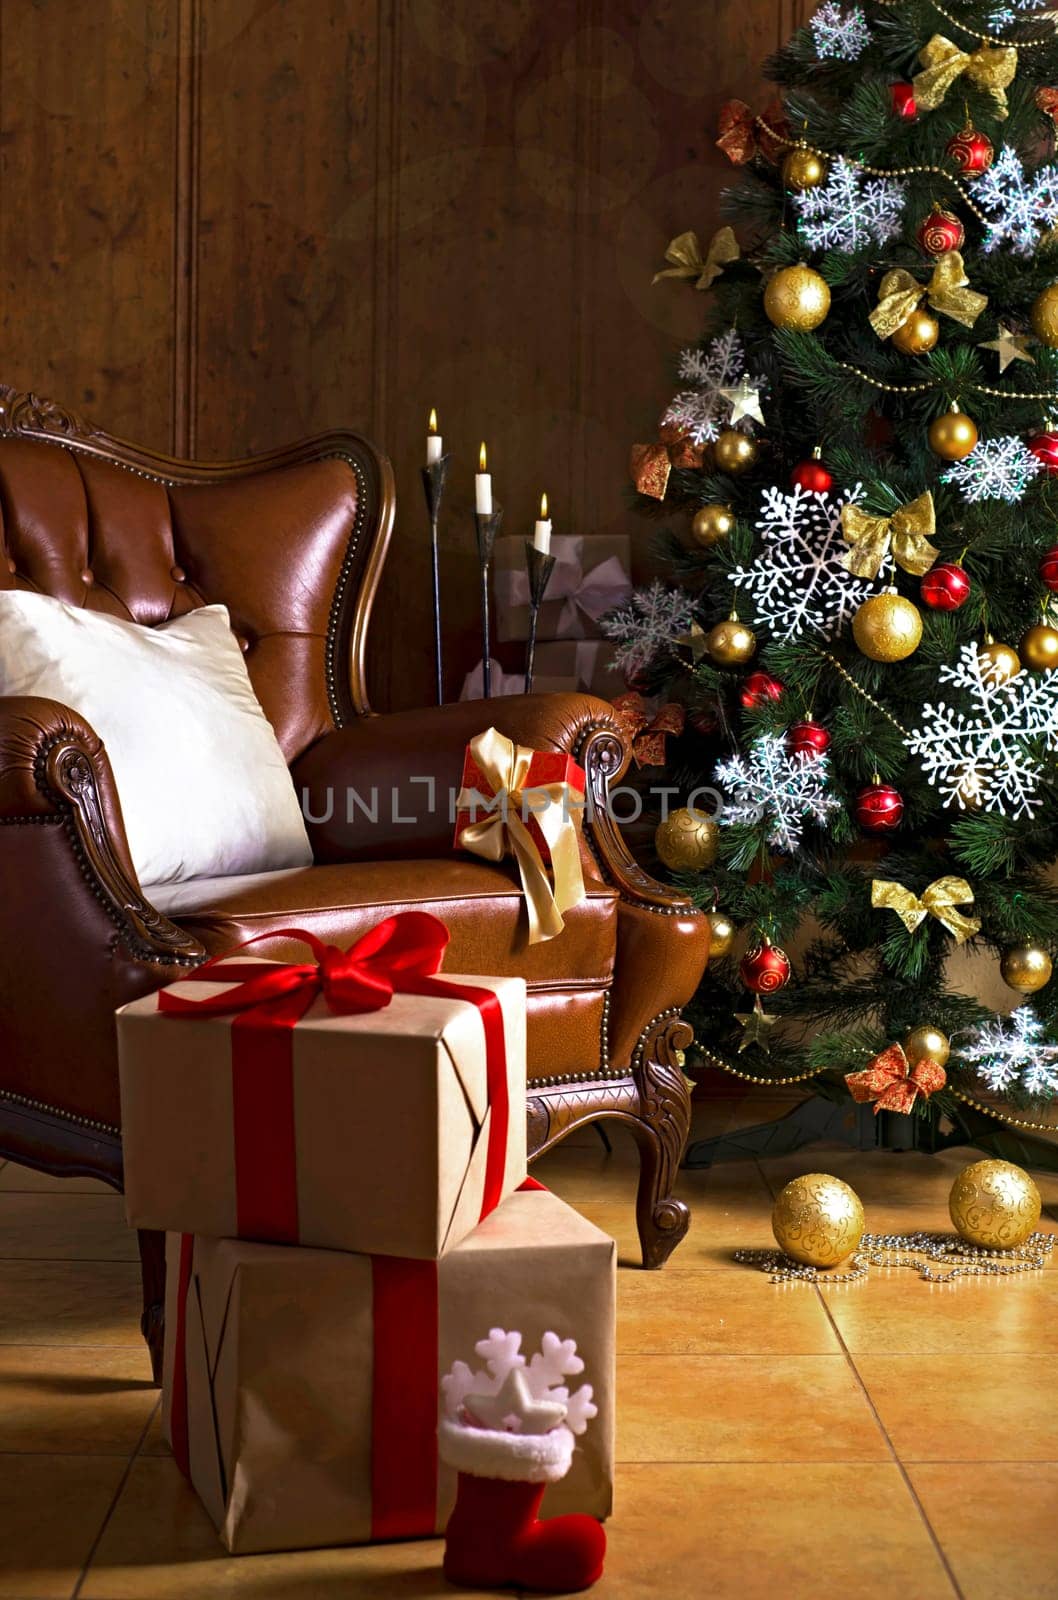 The living room in the house is decorated for Christmas. Christmas tree decorated for the holiday and a lot of gifts next to it. Cozy leather armchair next to the Christmas tree. Retro armchair in the house. by aprilphoto